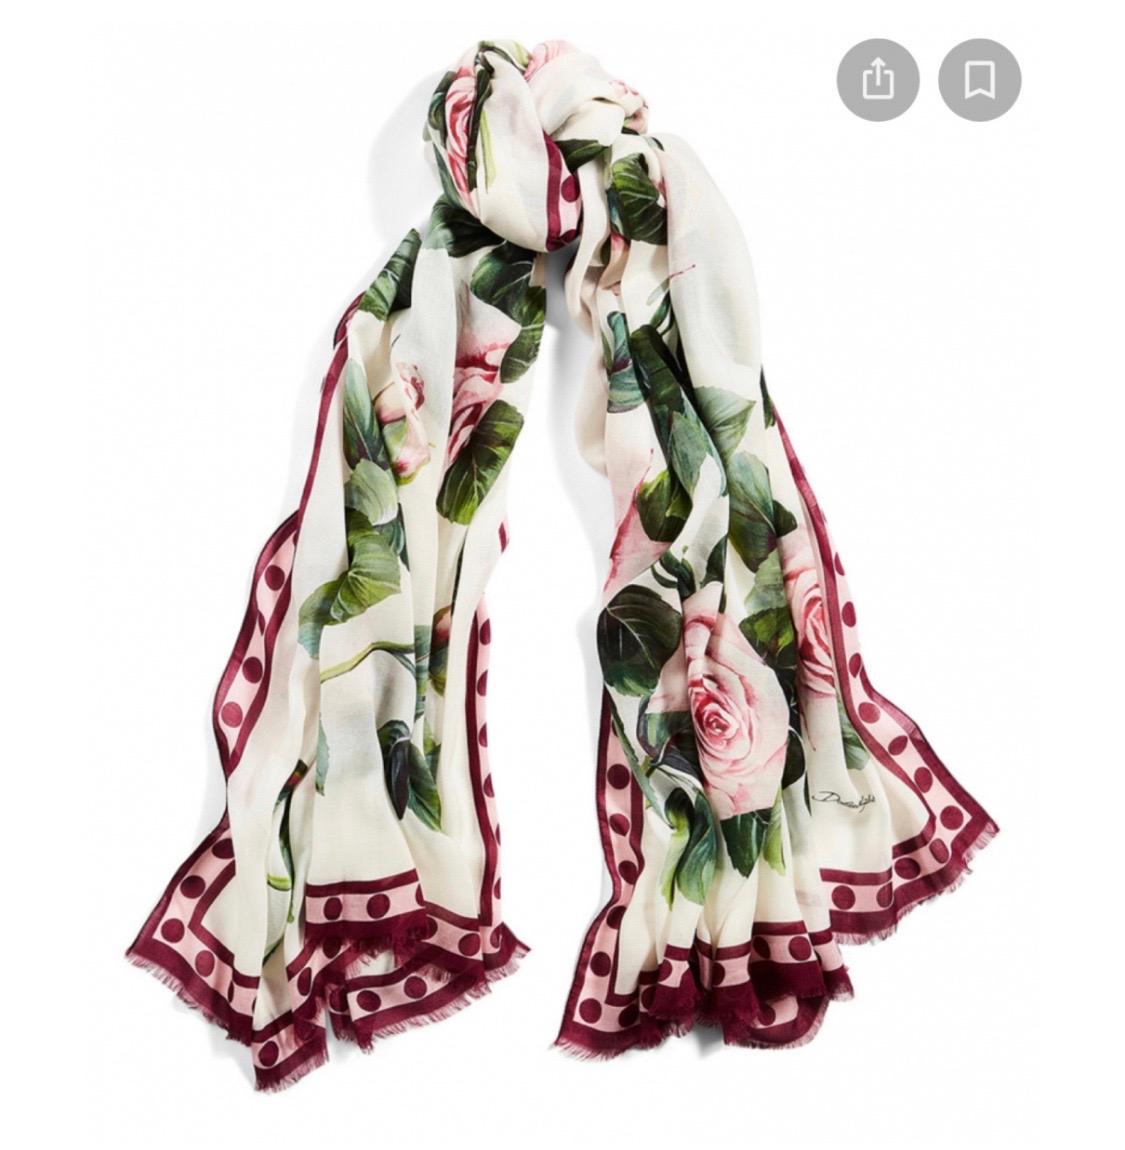 Dolce & Gabbana White Tropical
Rose printed cashmere modal blended scarf wrap

Floral Printed

Modal and cashmere-blend
Frayed trims

Dry clean

Made in Italy

90% Modal 10% Cashmere

Size 135cmx200cm

Brand new with original tags!
Gift bag can be